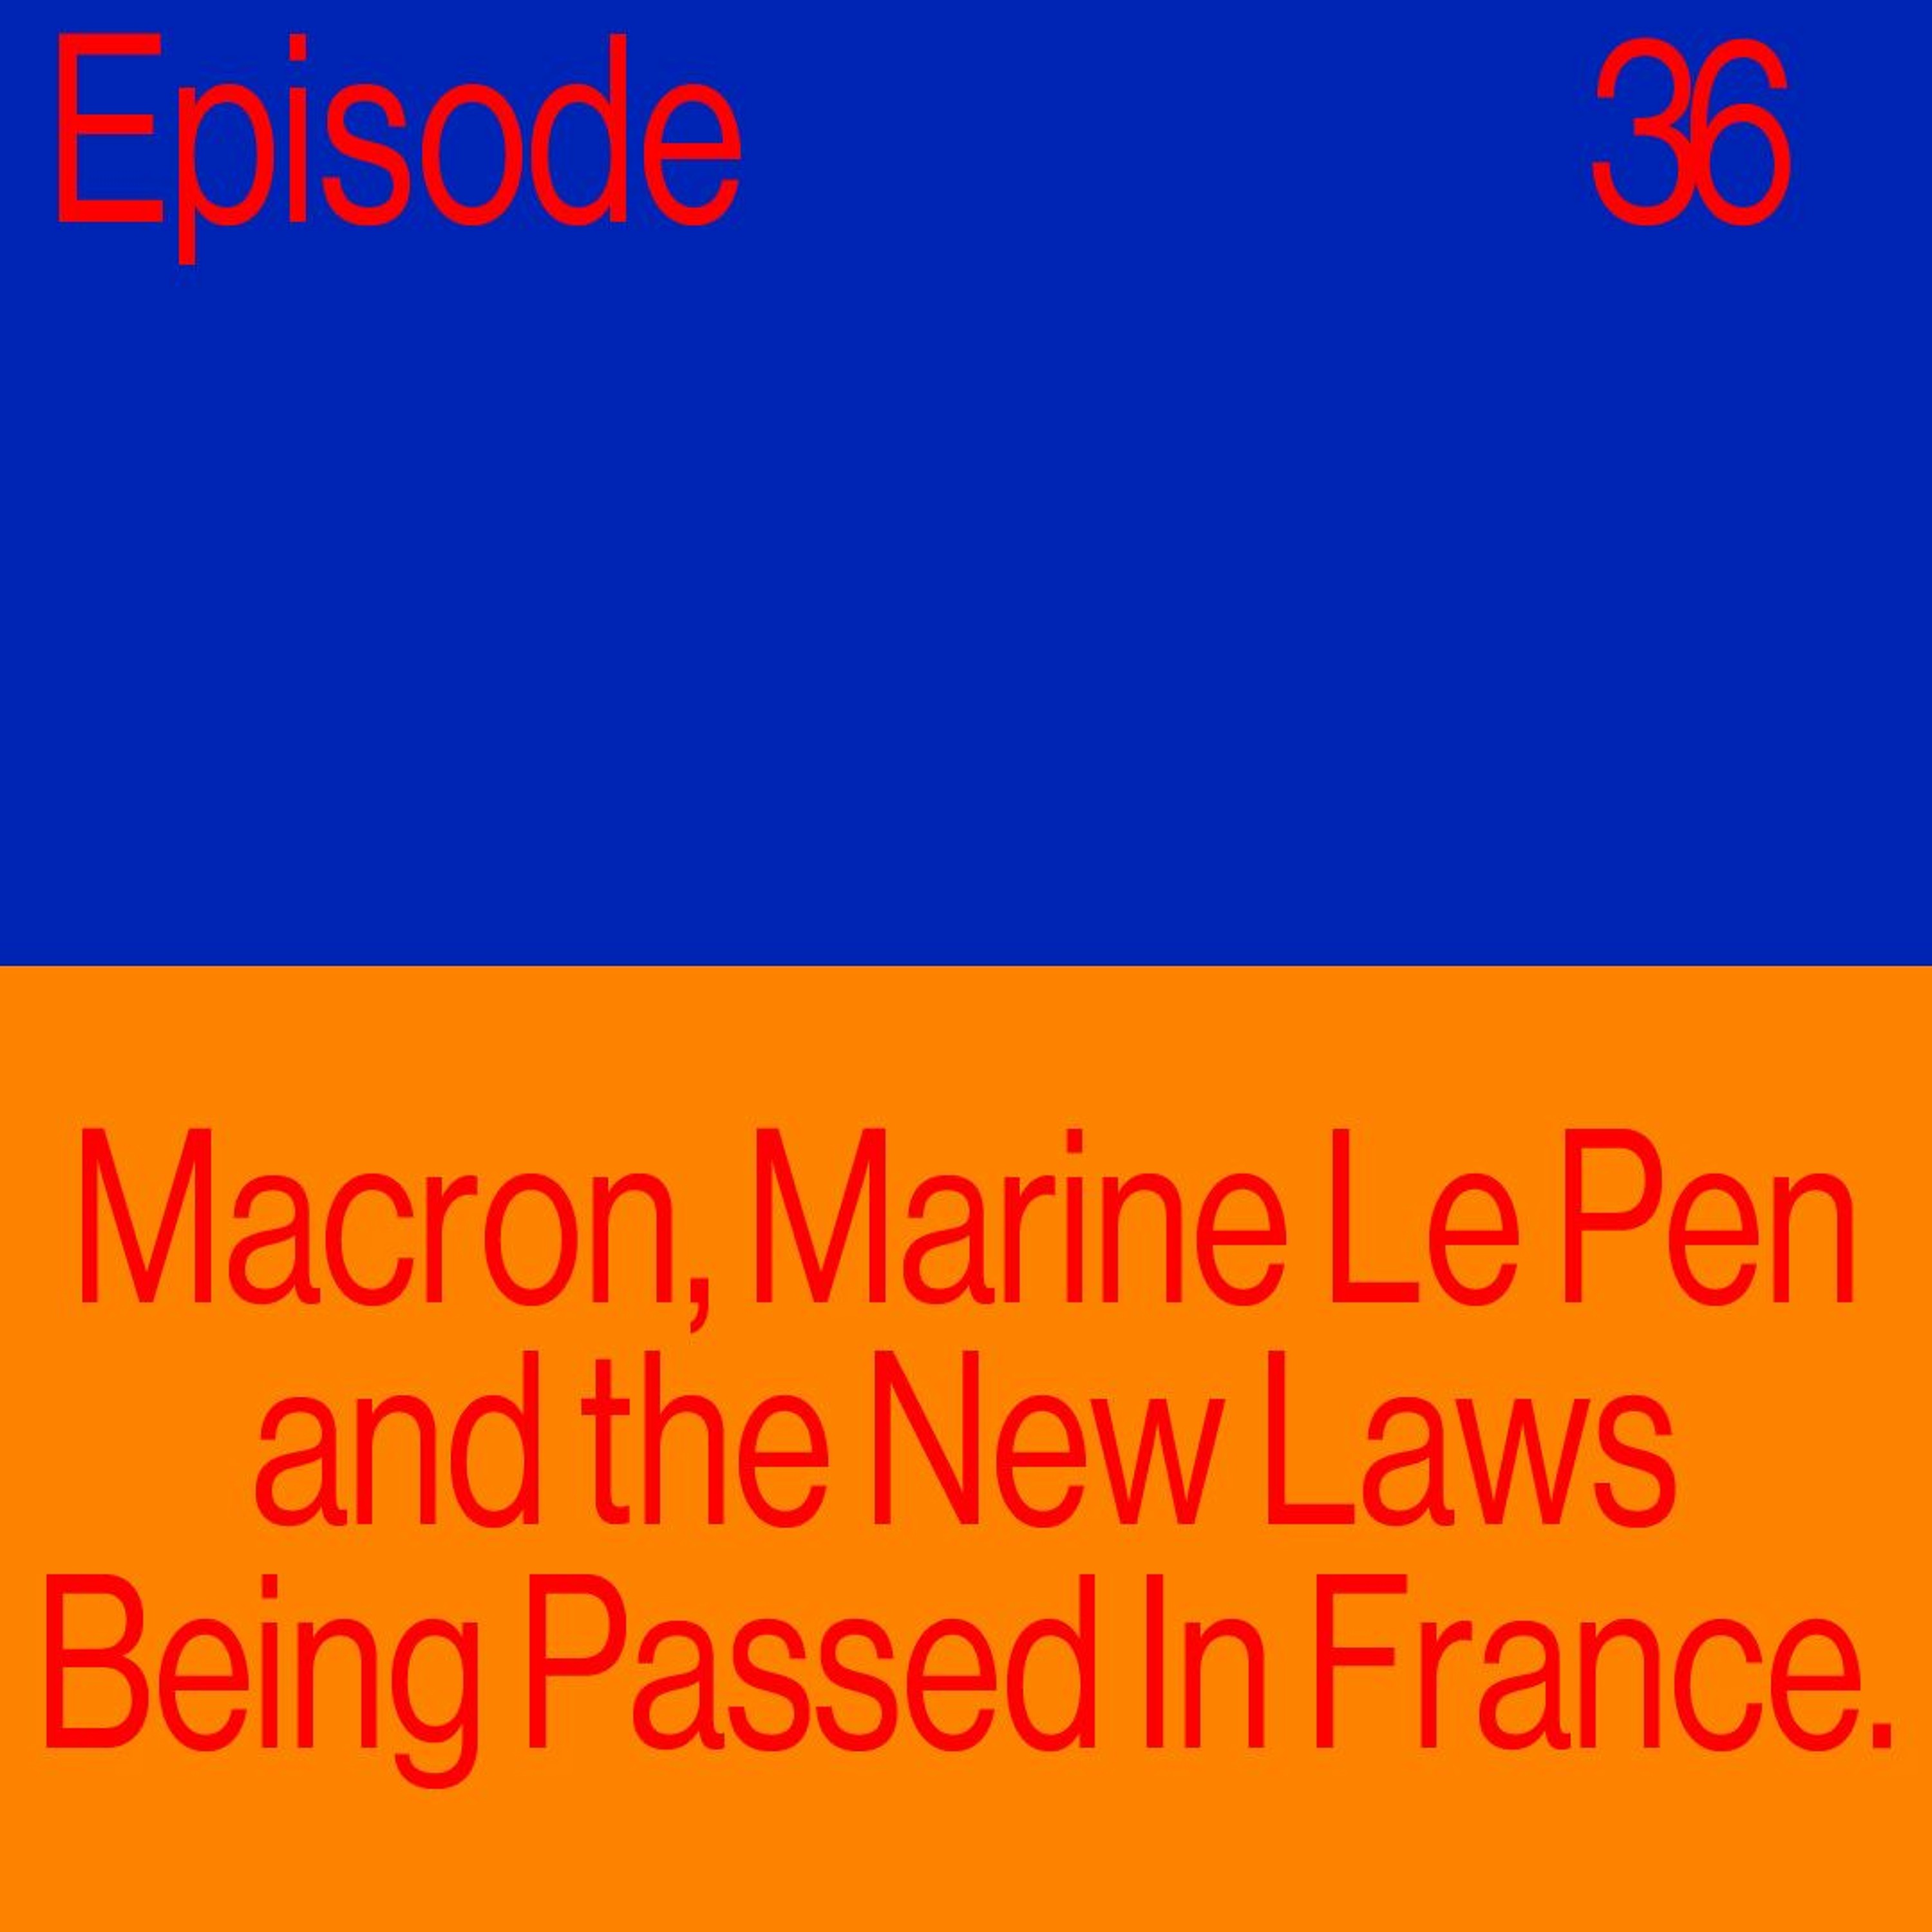 Episode 36: Macron, Marine Le Pen And The New Laws Being Passed In France